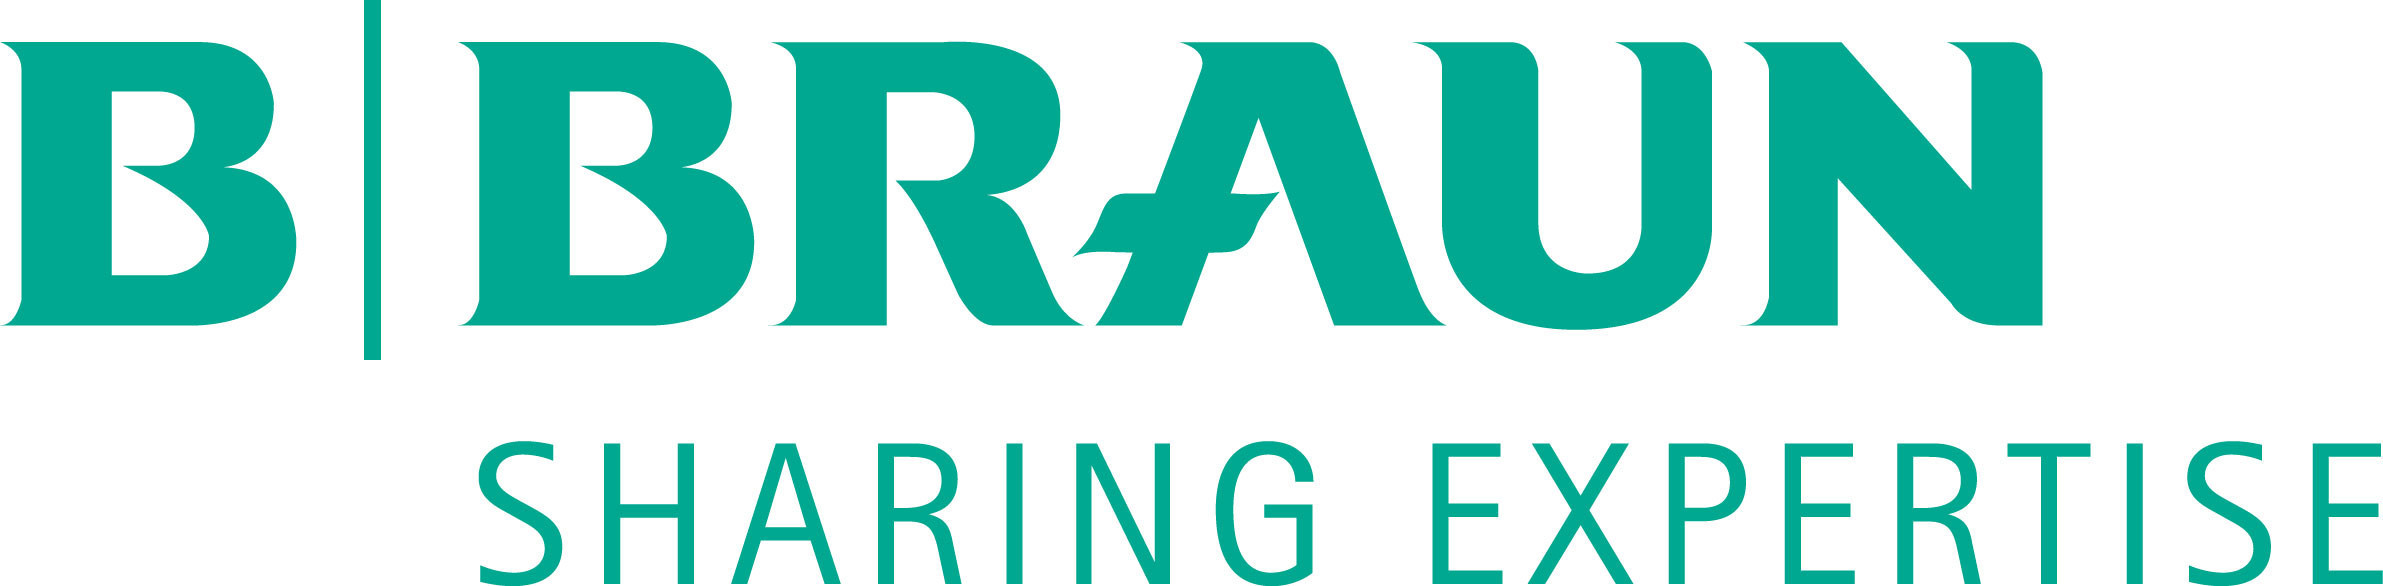 B. Braun Will Showcase its APEX® Compounding System with Clinical Decision Support Order Entry Software at the ASHP Midyear Meeting and Exhibition